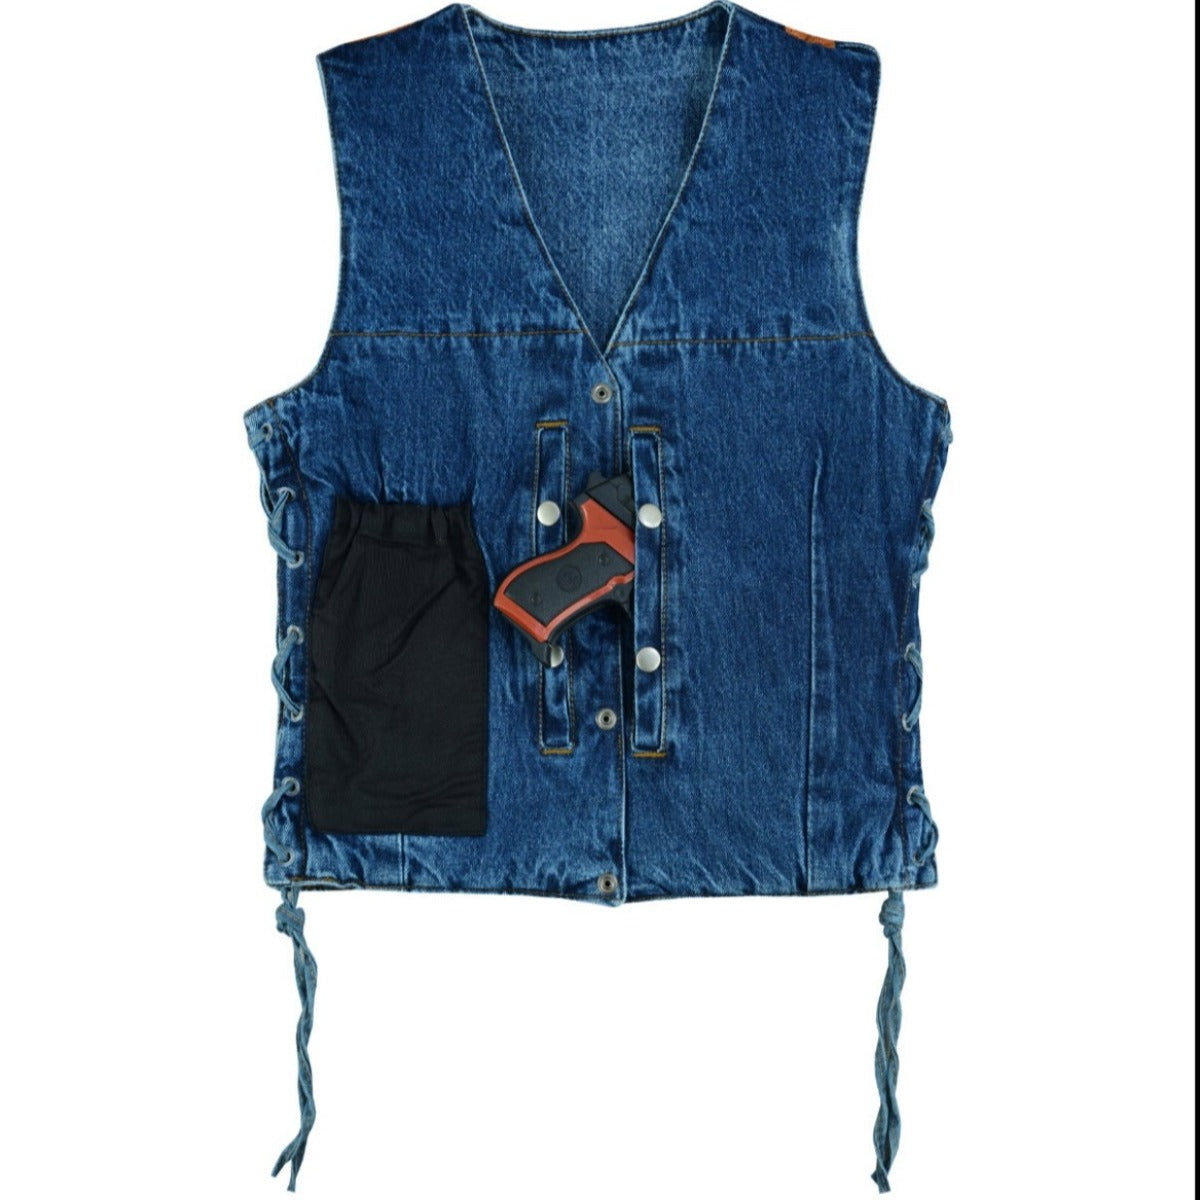 An Vance Leather Women's Blue Denim V-Neck Vest w/Snap Opening & Side Laces with a pocket on it.